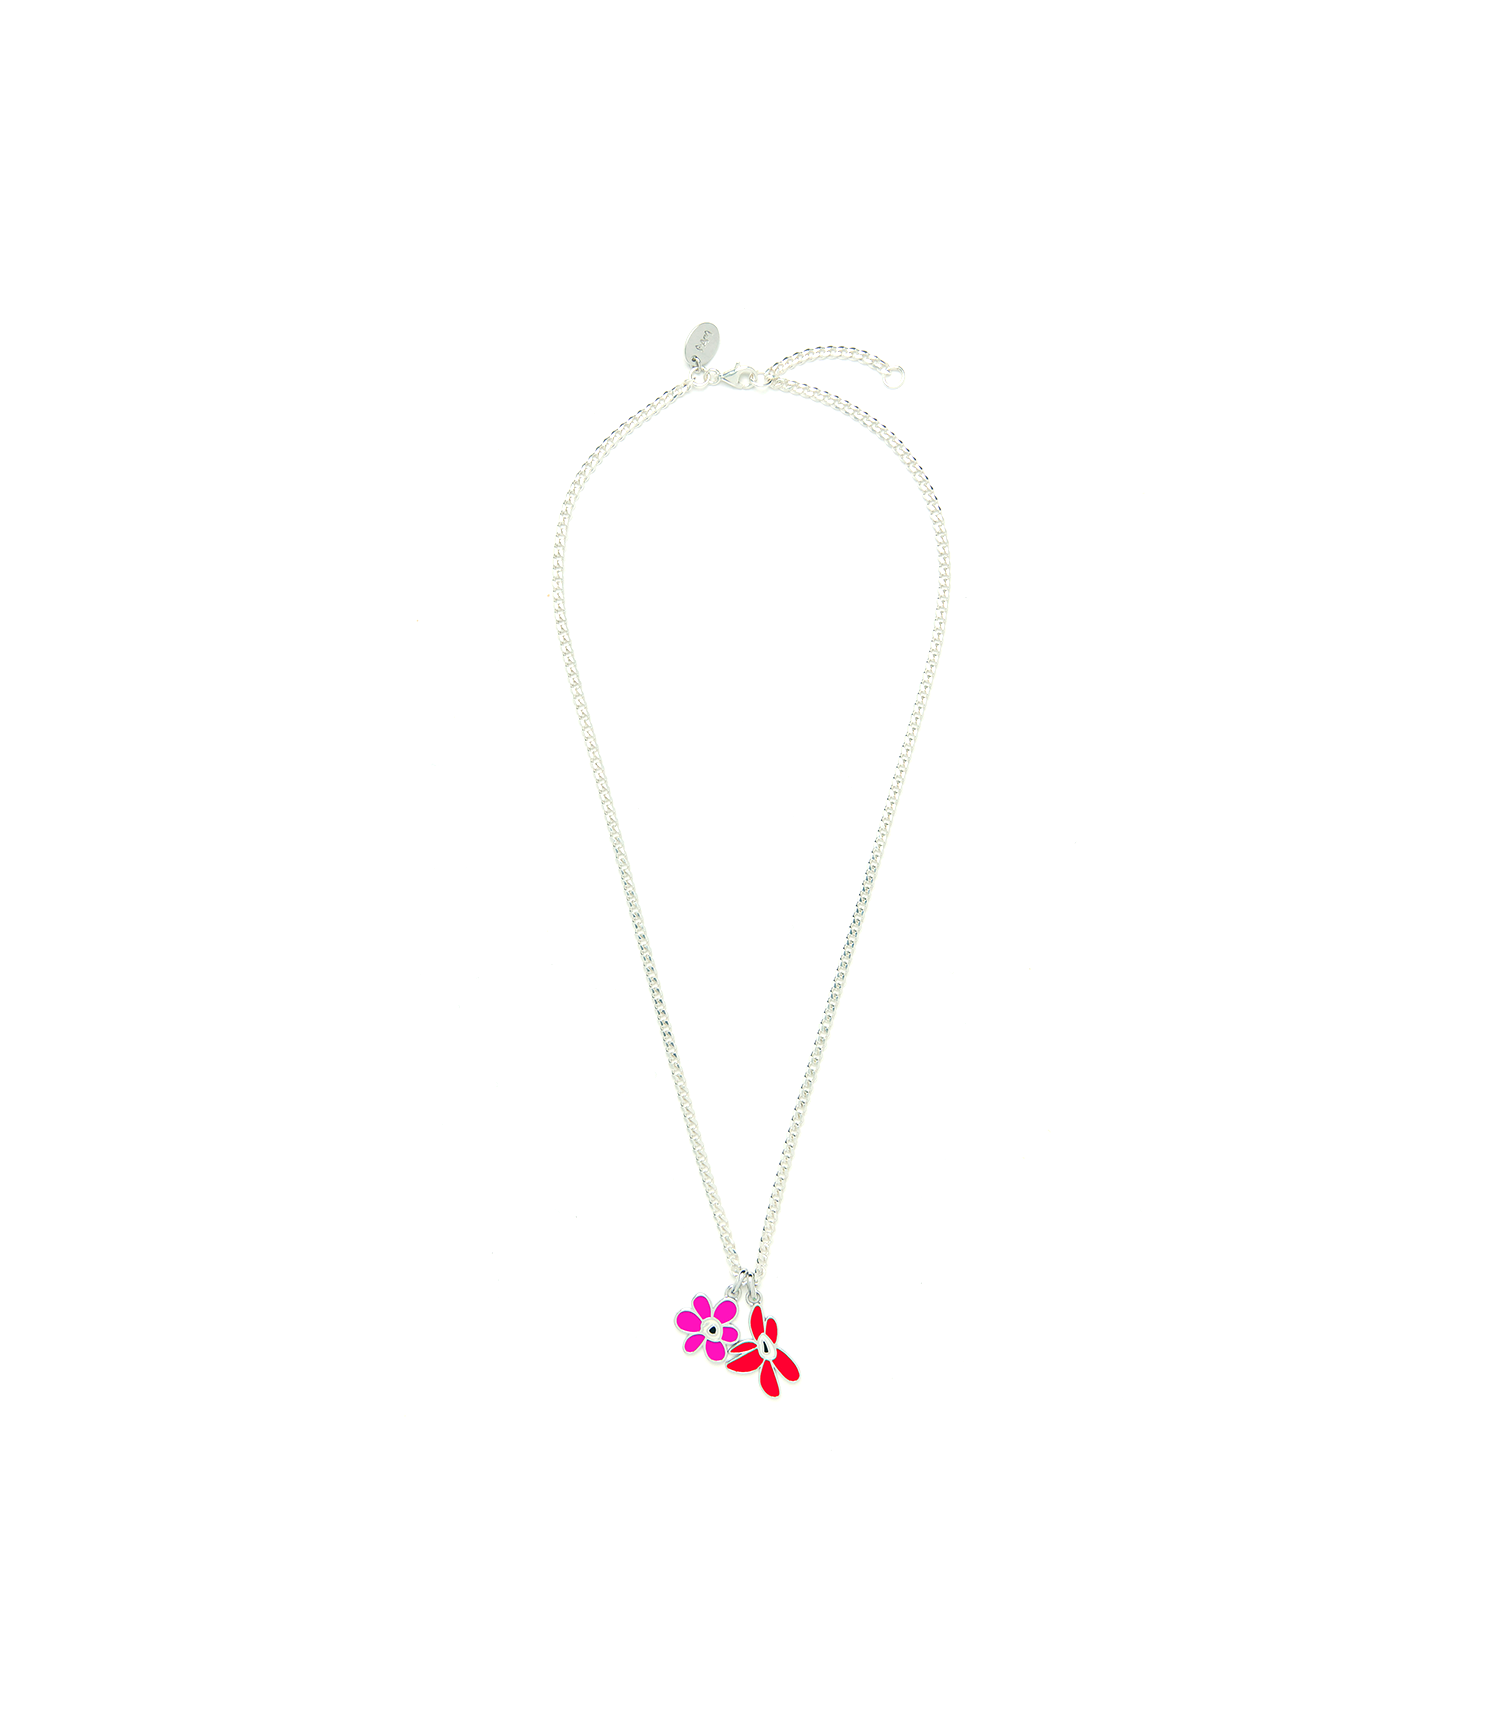 Dual Gesture Necklace B - Red / Dragonfruit